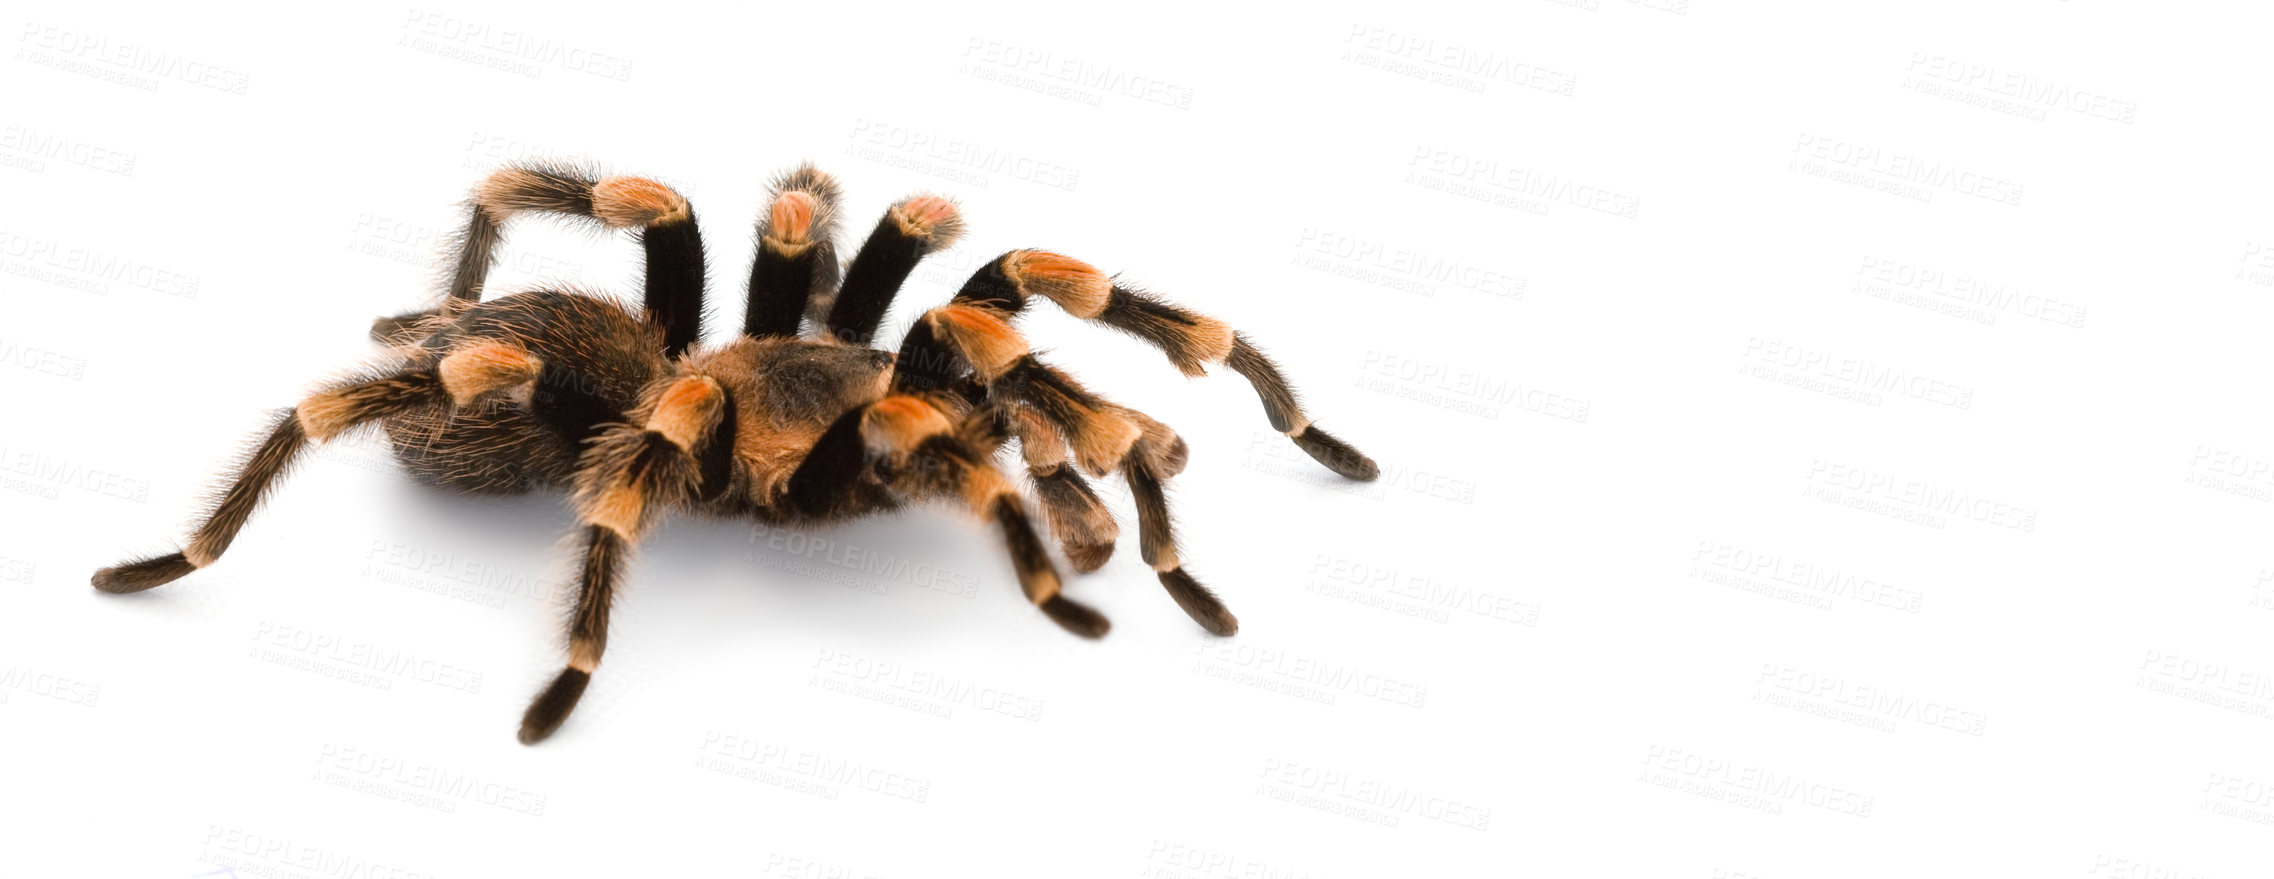 Buy stock photo Closeup of a mexican red knee tarantula spider against white studio background. A dangerous hairy arachnid with fatal poisonous, deadly and fatal venom in its fangs. Wildlife animal standing alone